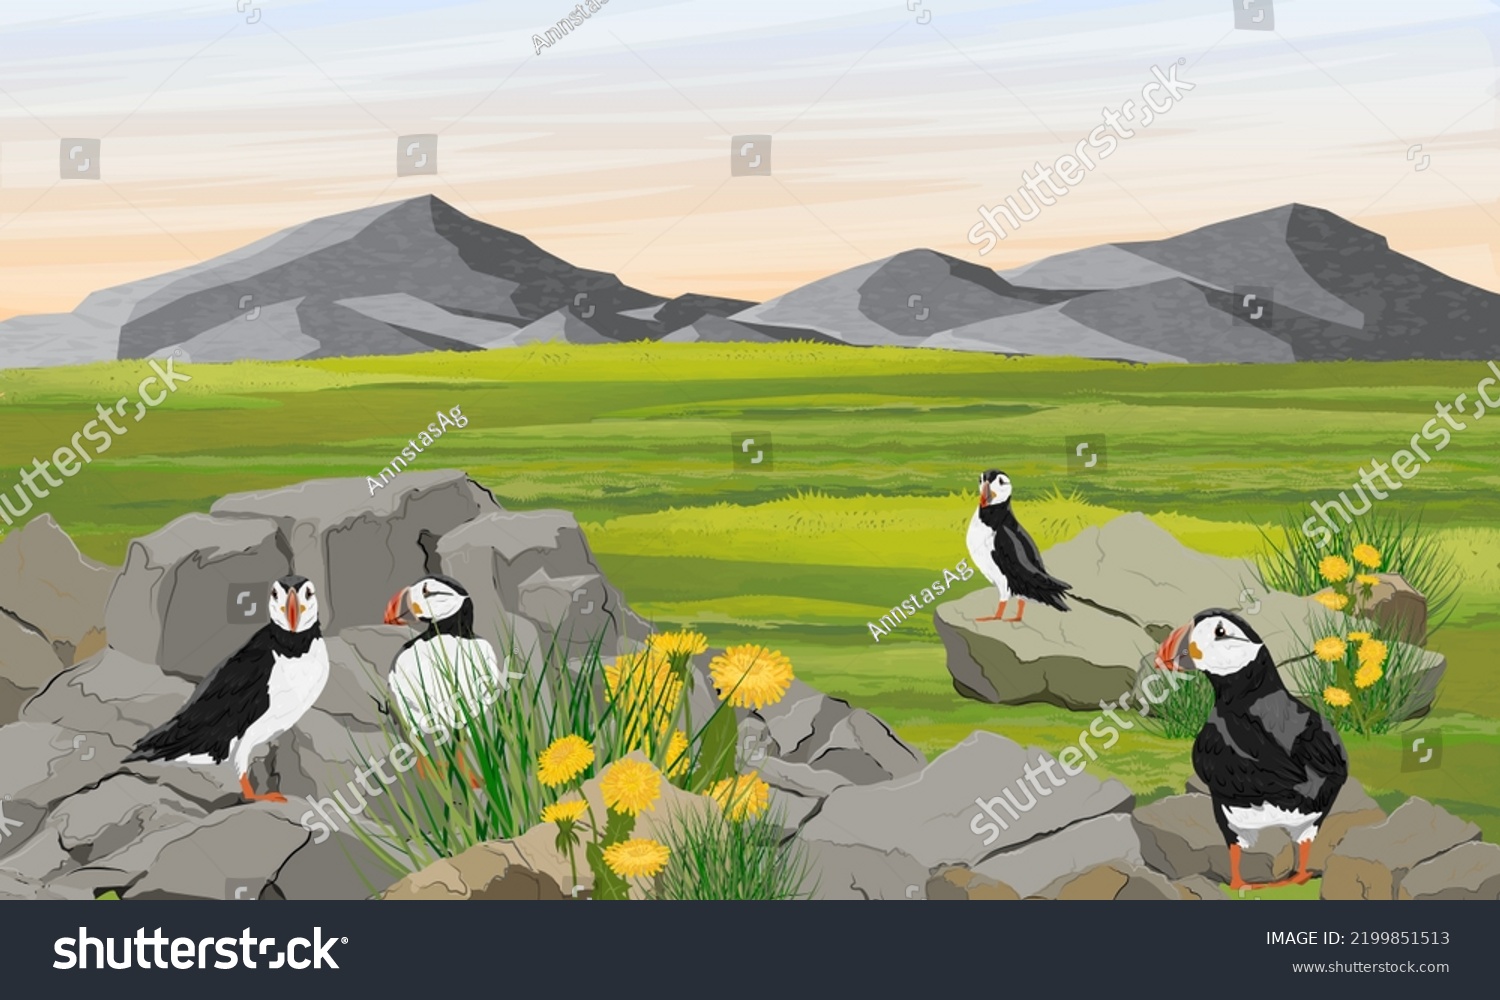 SVG of A flock of Atlantic puffins in a valley by the ocean. Scandinavian bird Fratercula arctica or common puffin. Realistic vector landscape svg